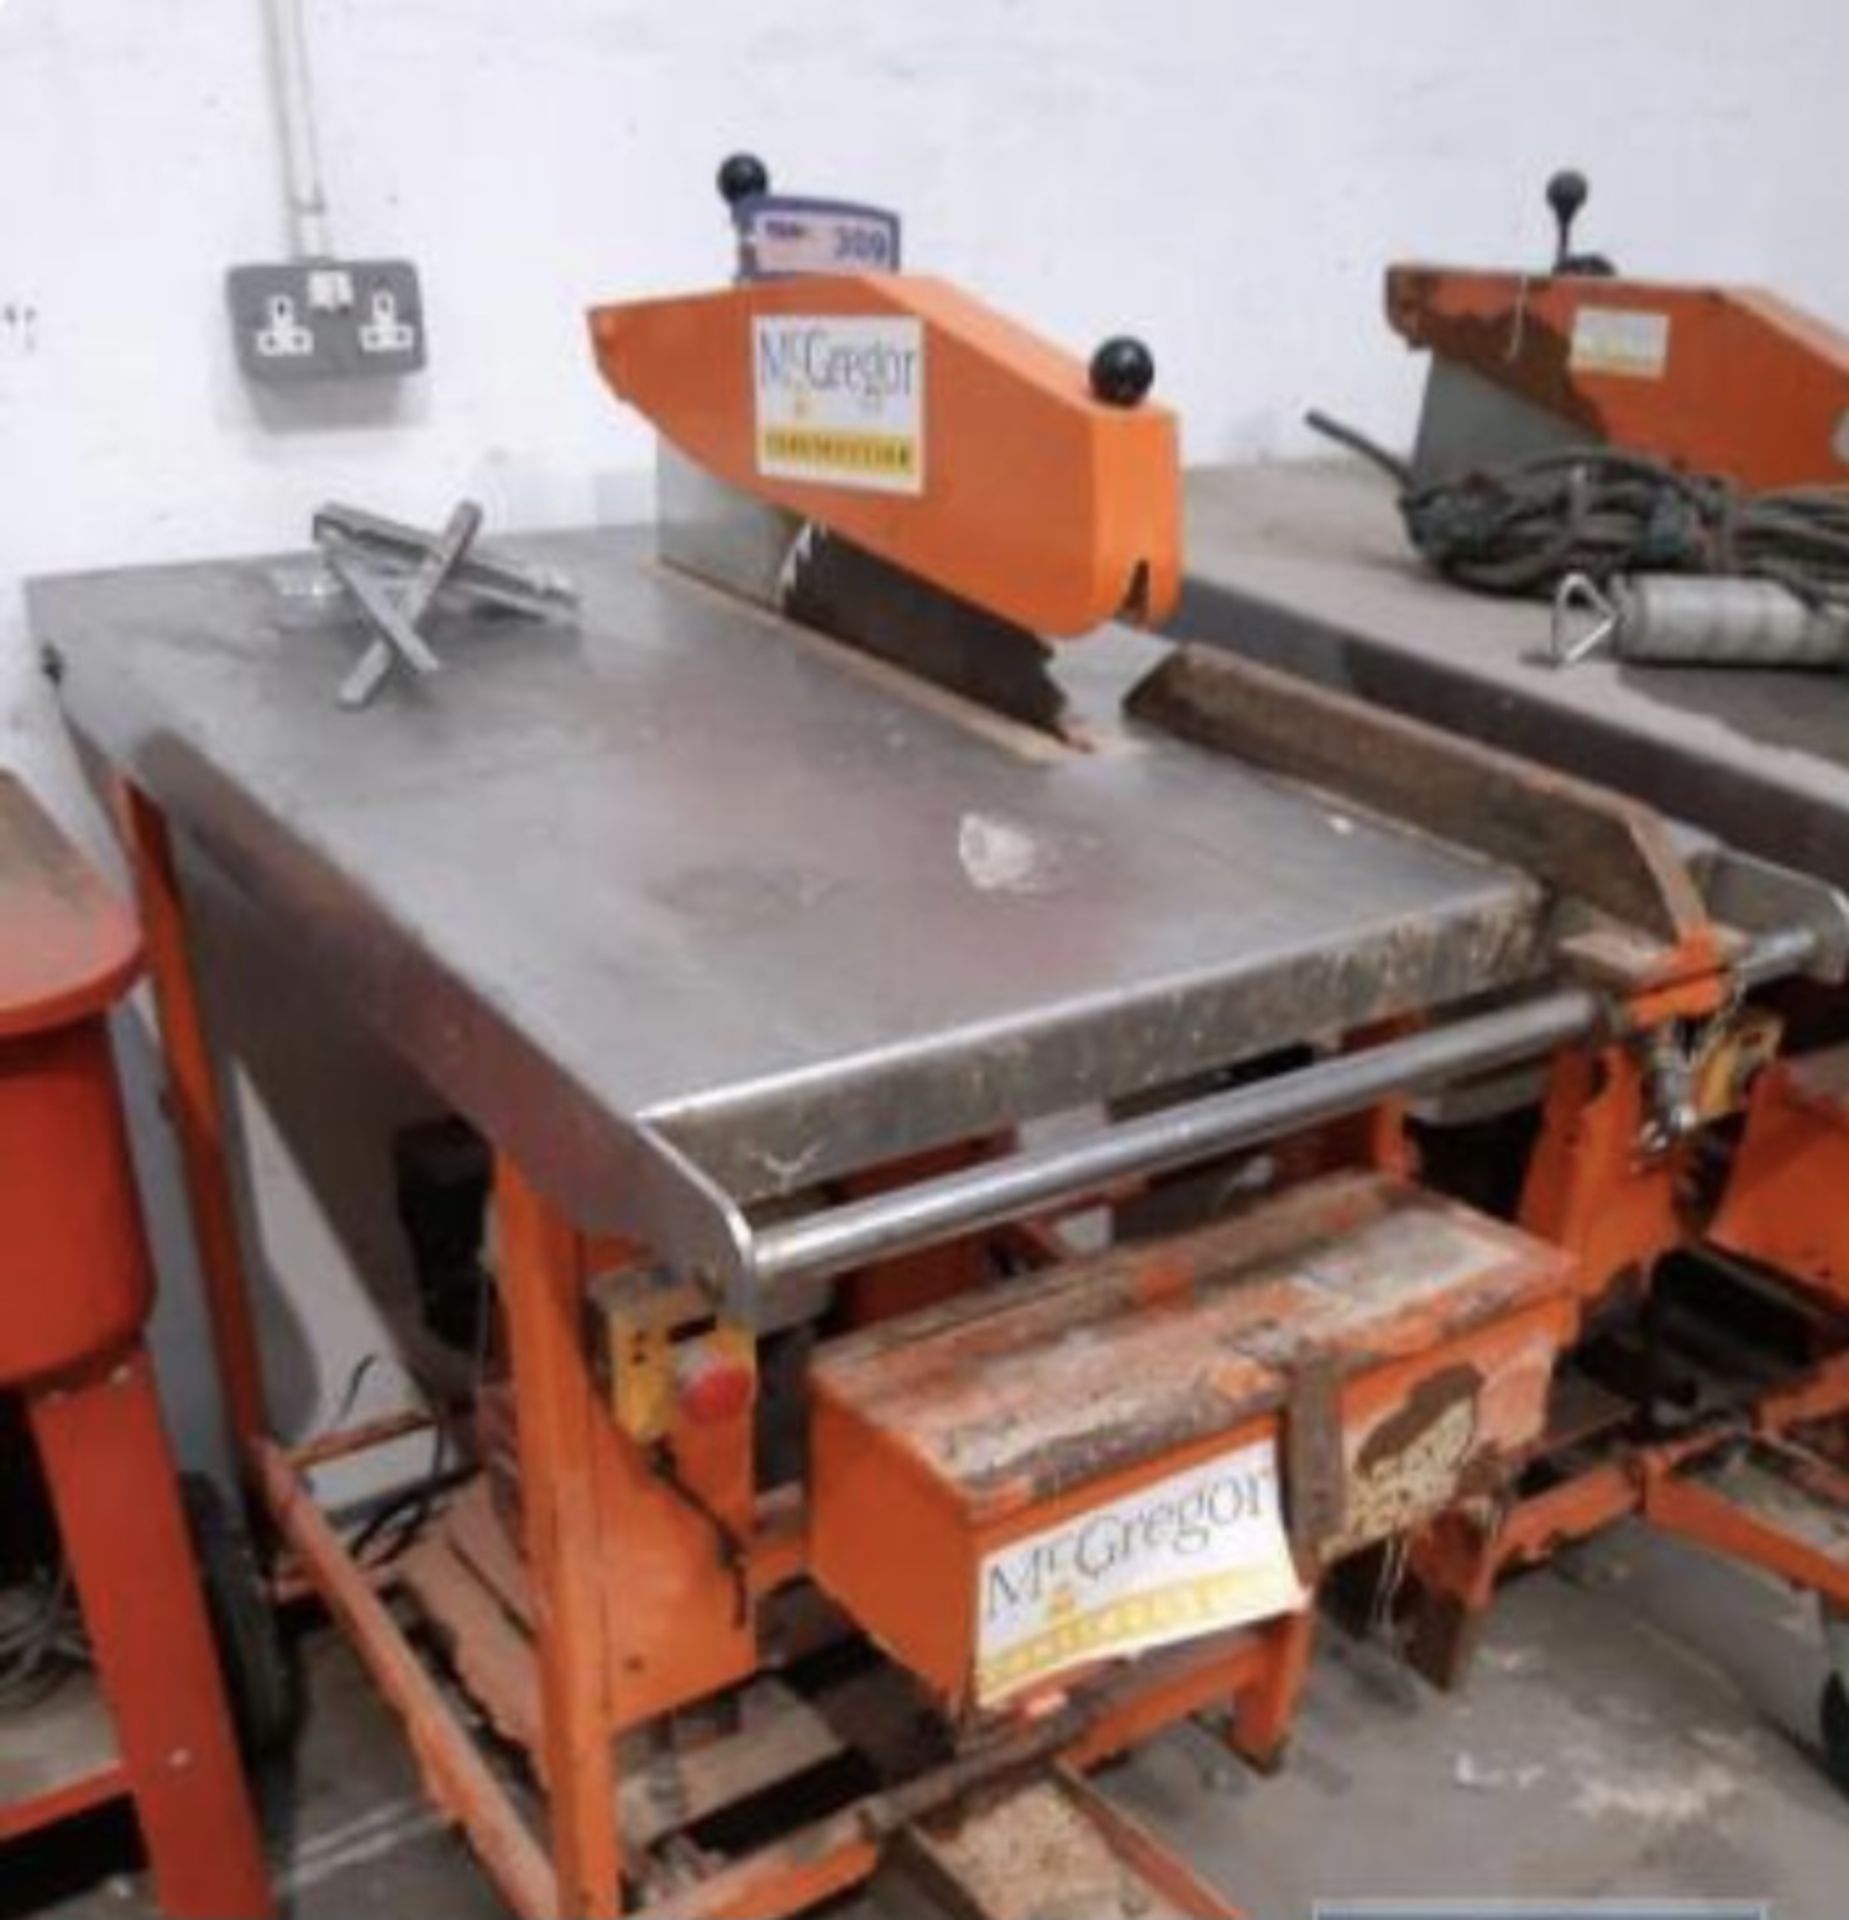 CLIPPER HONDA ENGINE TABLE SAW.LOCATION NORTH YORKSHIRE. - Image 3 of 3